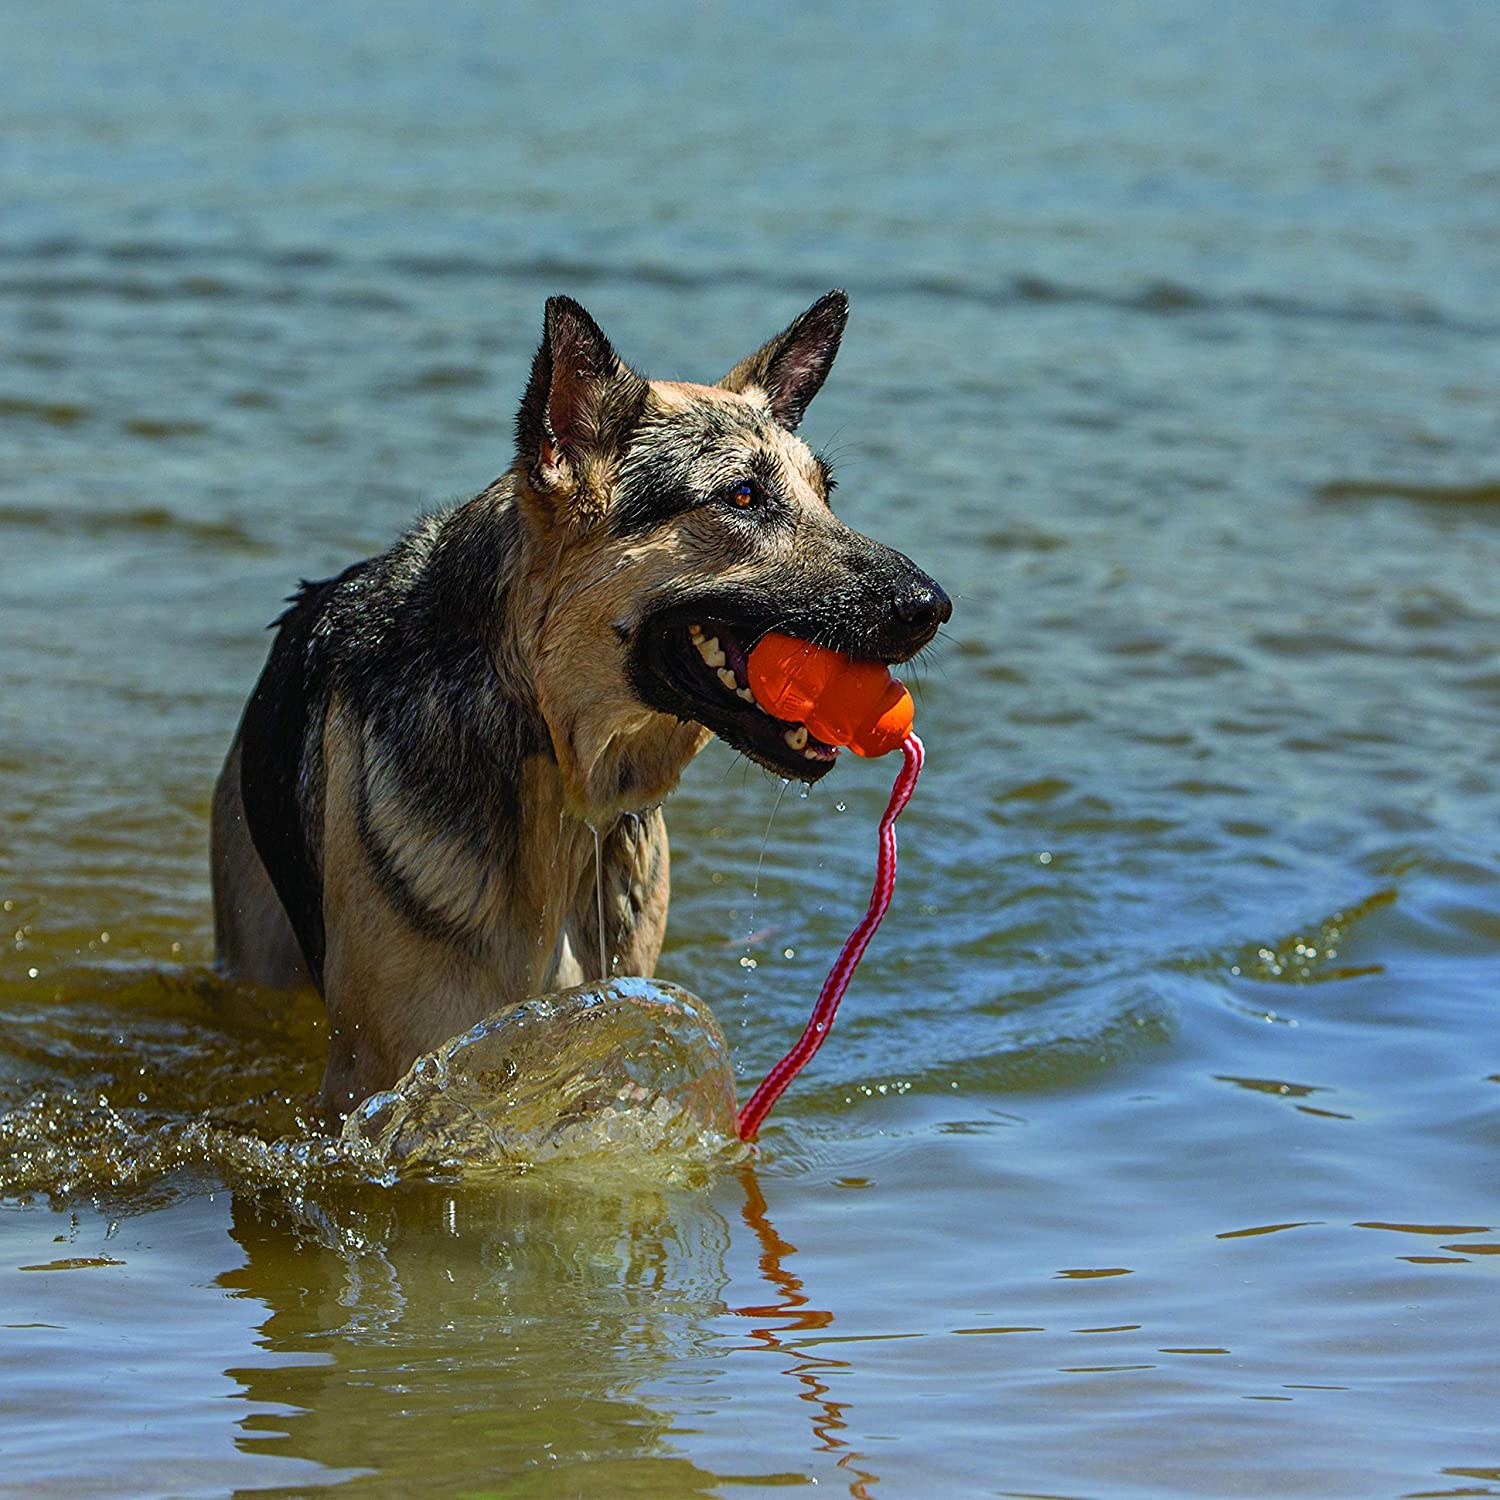 German shepherd in water holding red Kong toy in their mouth 